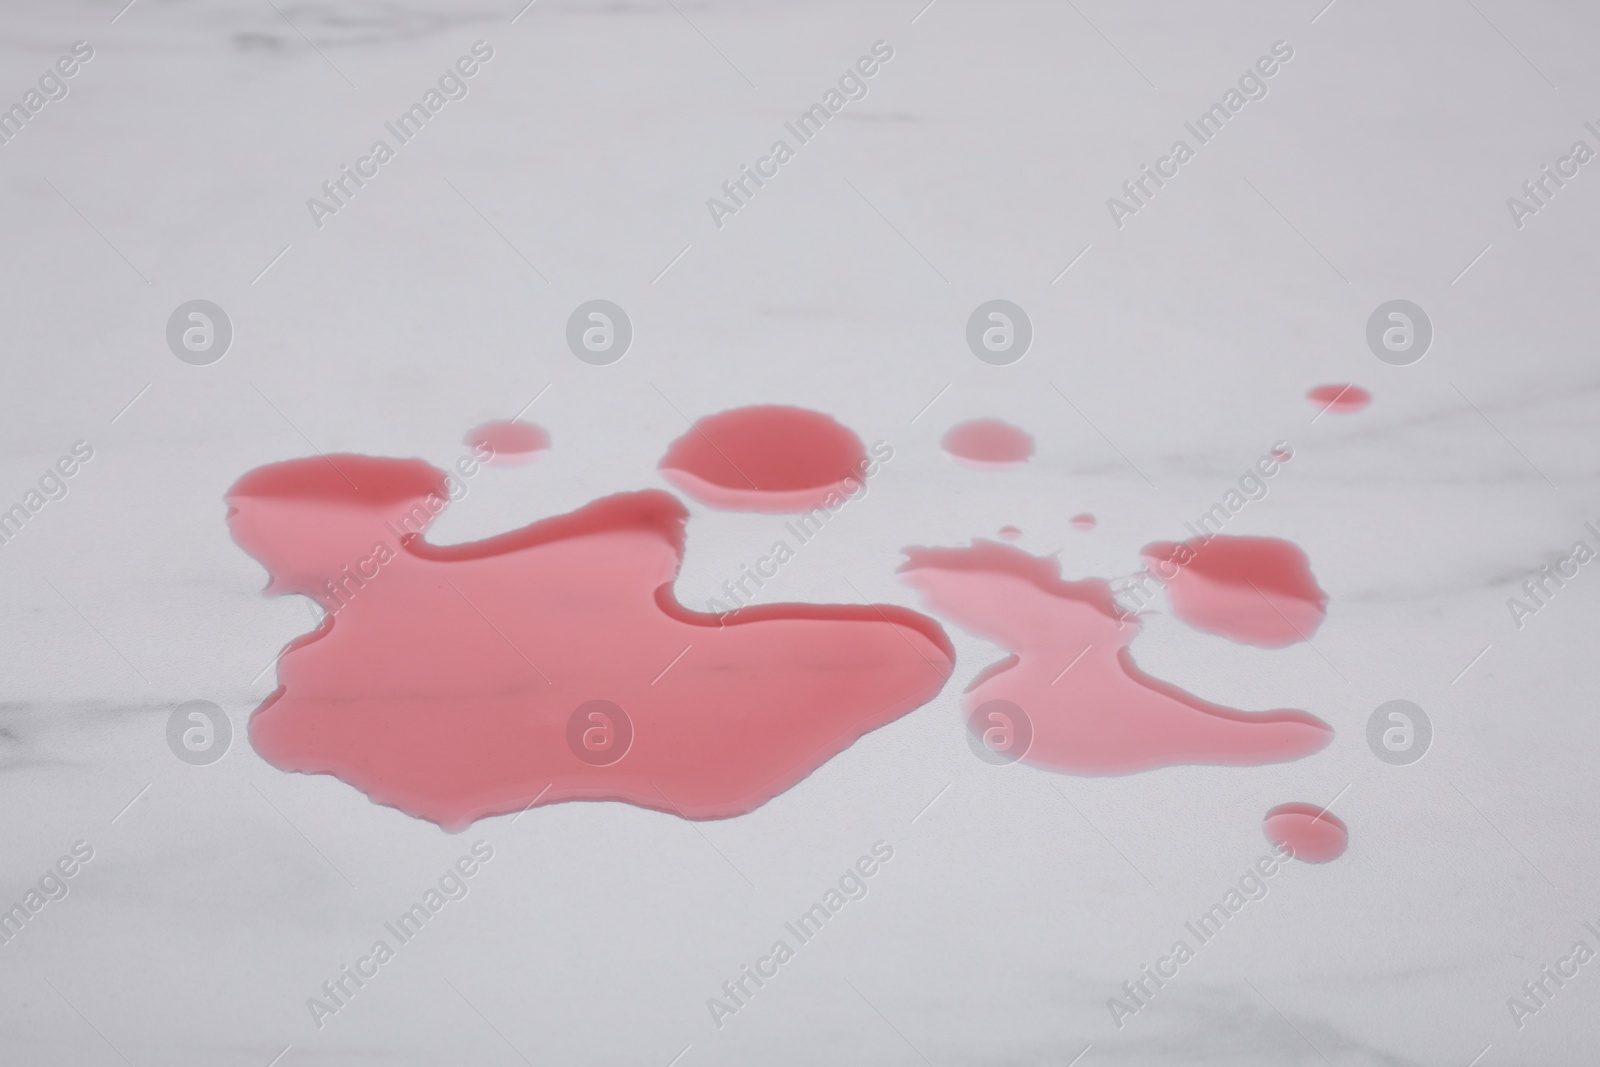 Photo of Puddle of red liquid on white marble surface